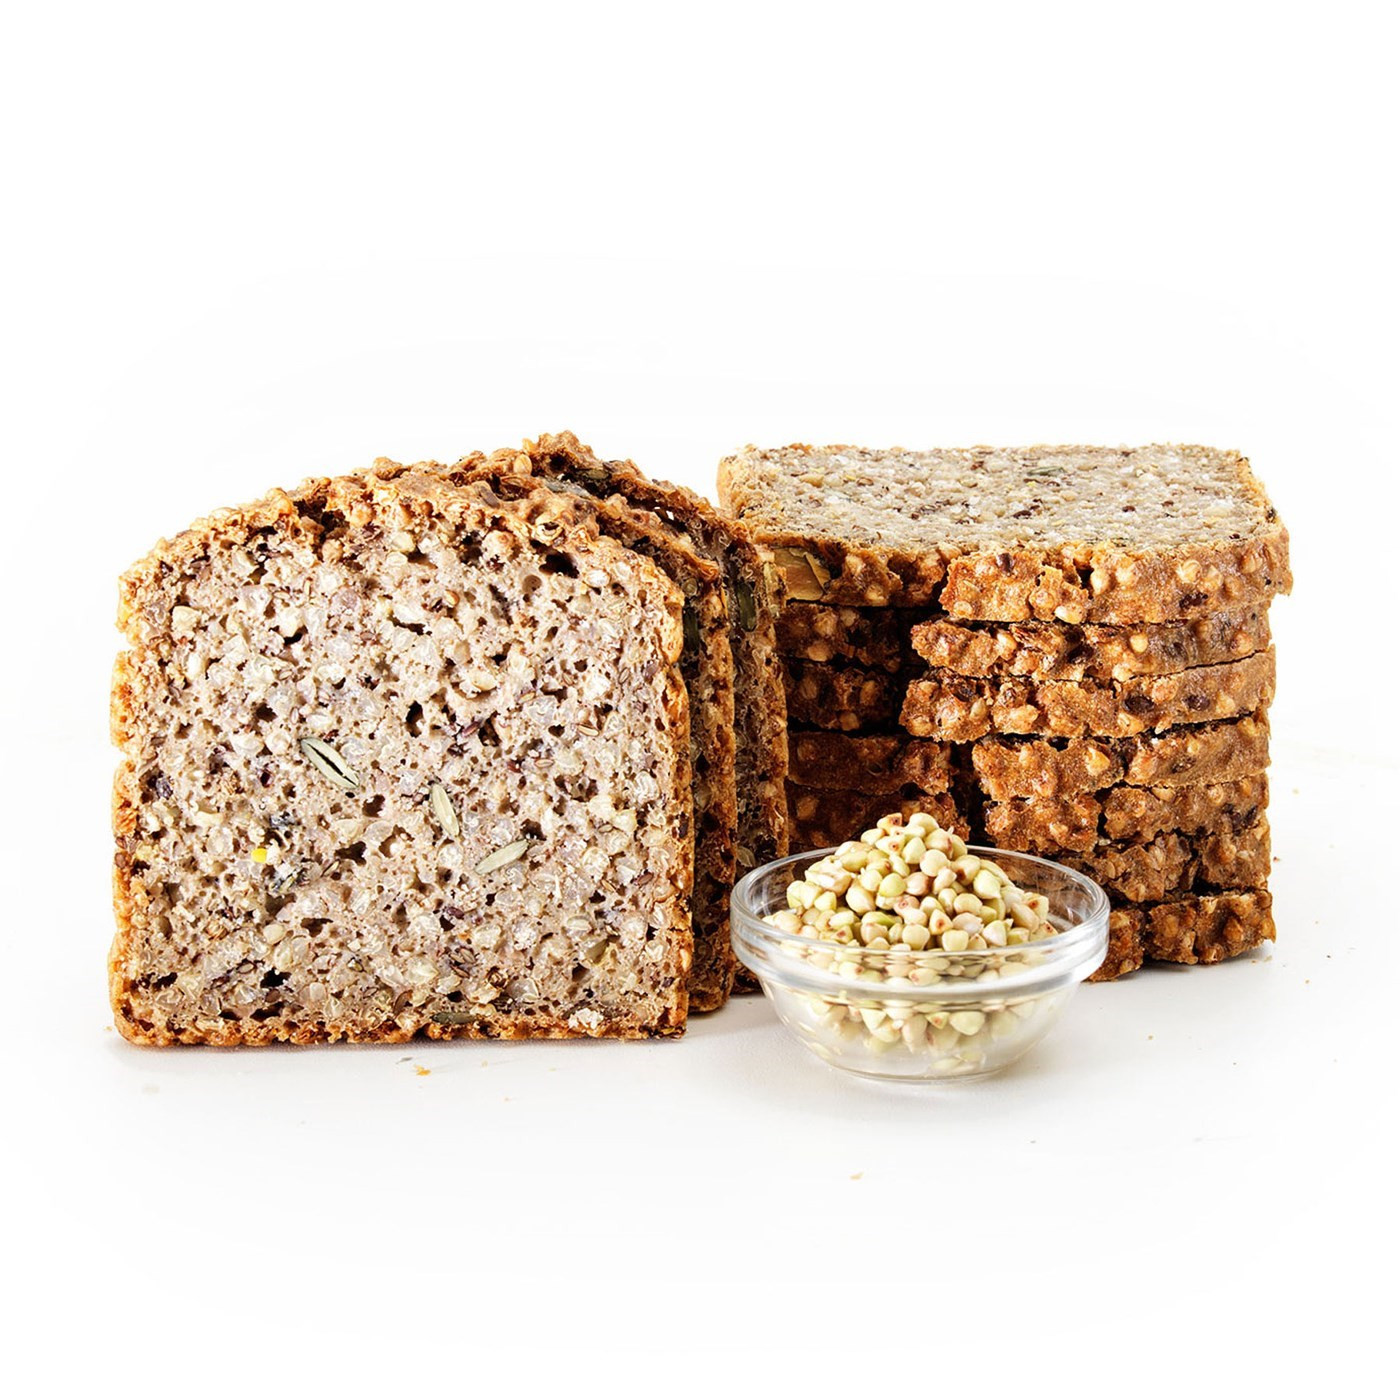 Organic Gluten Free Bread Awesome organic Gluten Free Buckwheat &amp; Linseed Sprouted Sliced Bread